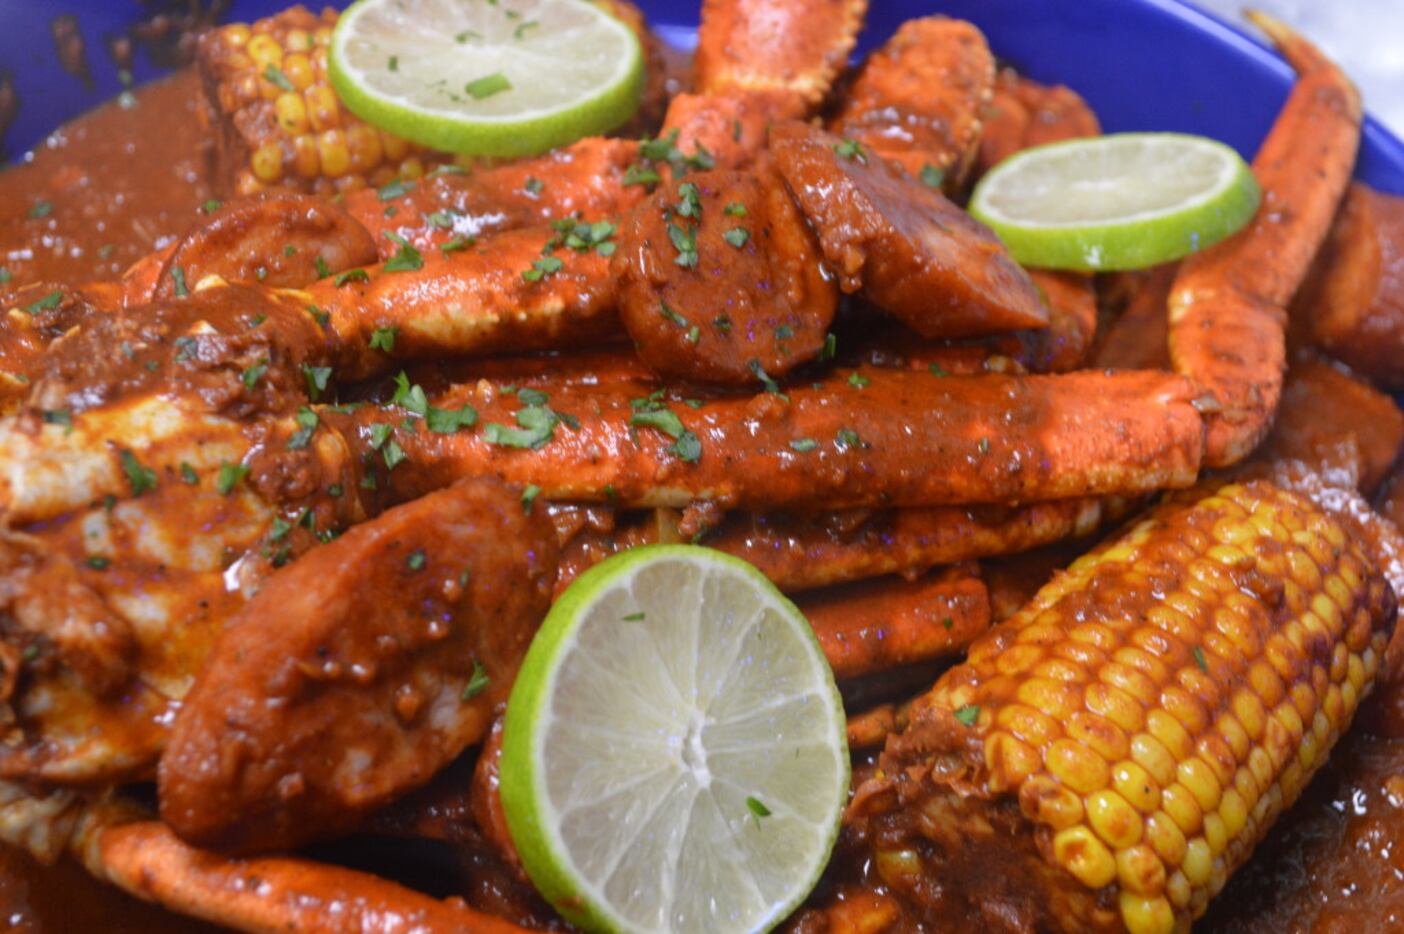 Ragin' Crab Cafe's Valentine's Day menu will include a seafood feast to share with crab,...